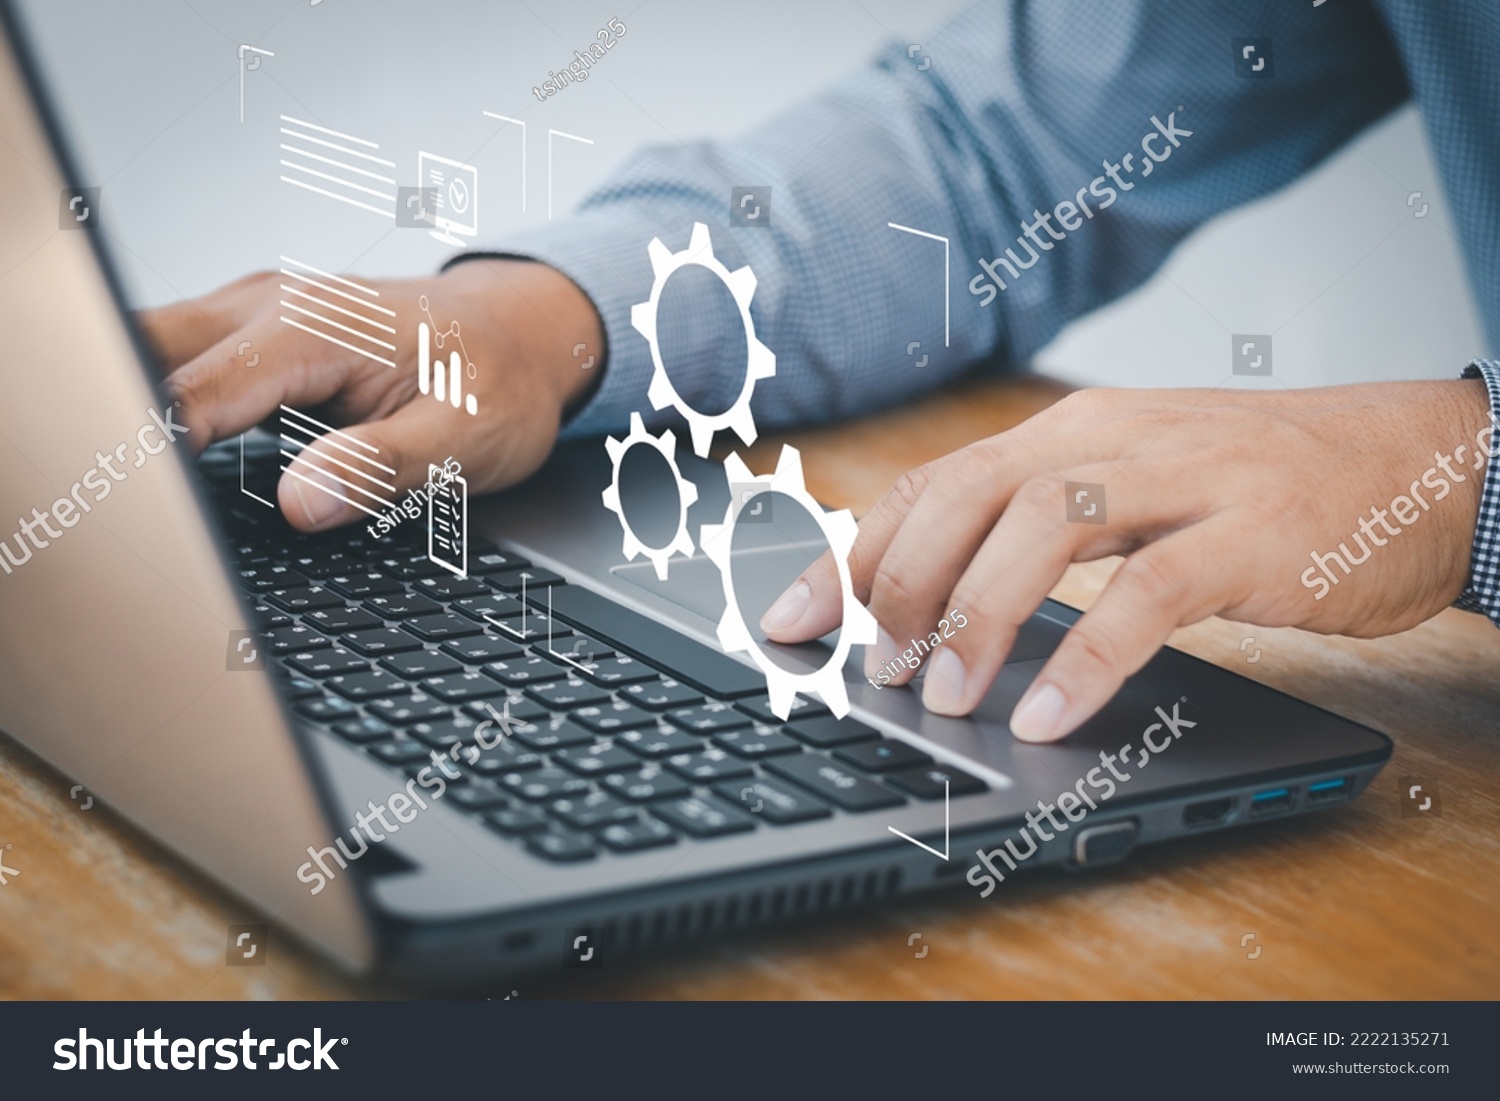 Person working on computer laptop. automation, industrial business process workflow optimisation concept on virtual digital screen. Automation Software Technology Process System Business concept. #2222135271